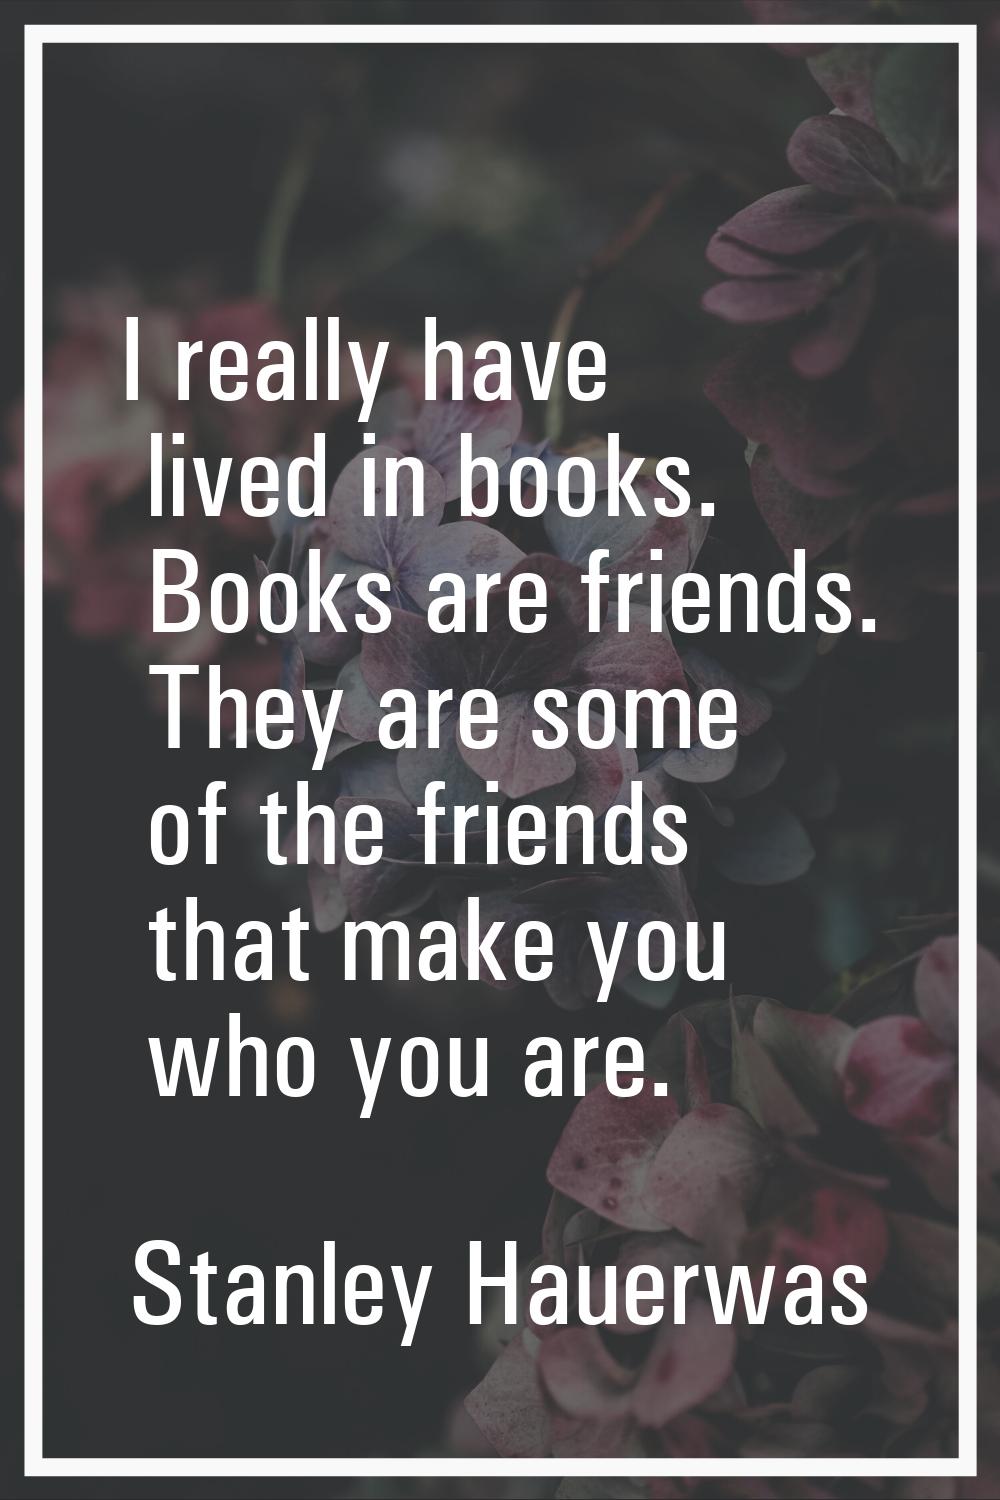 I really have lived in books. Books are friends. They are some of the friends that make you who you